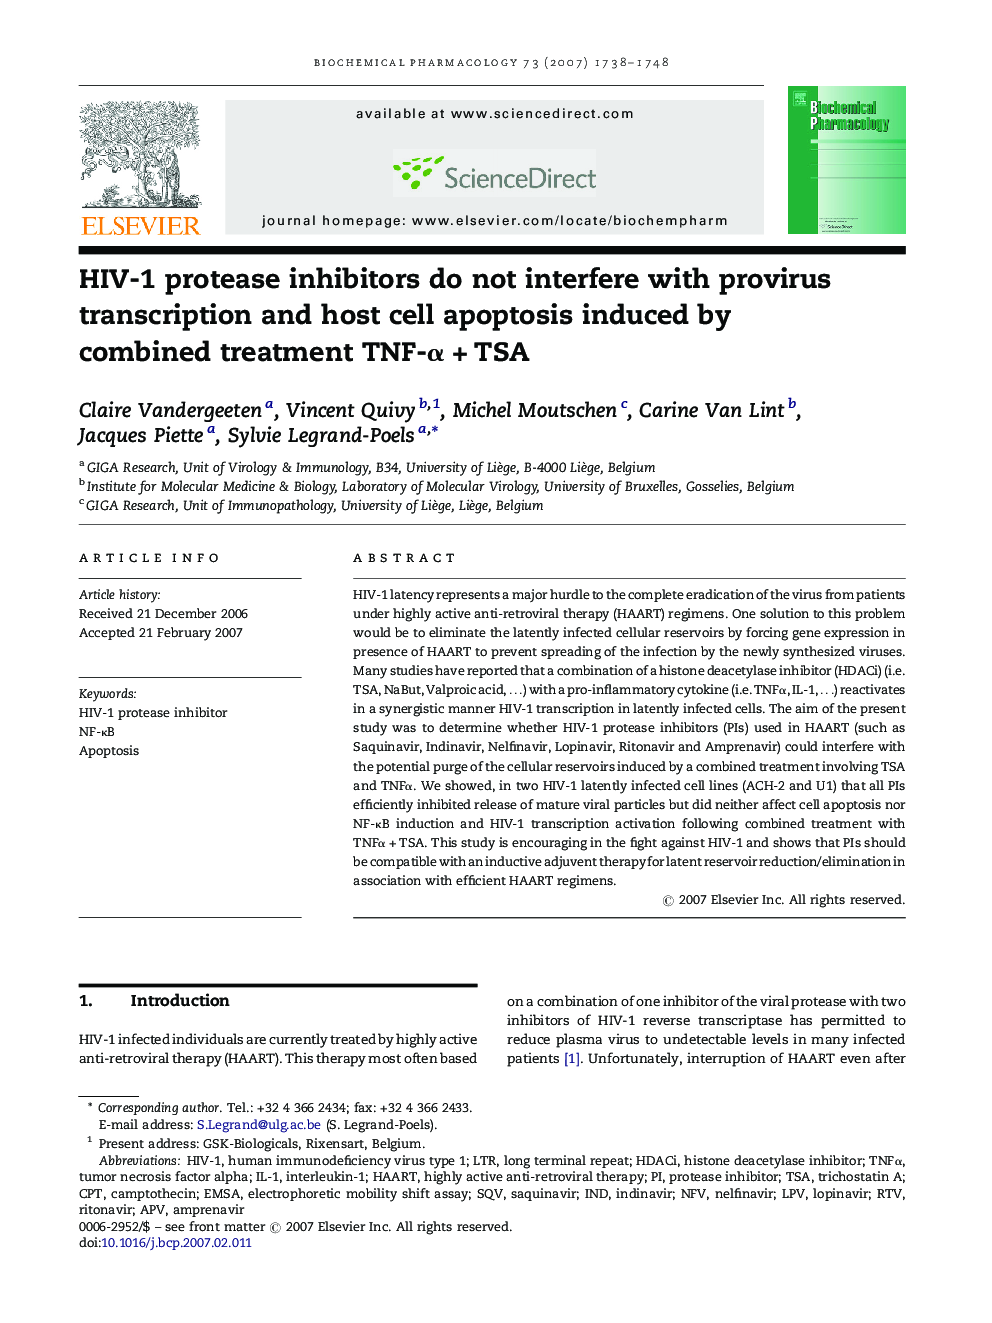 HIV-1 protease inhibitors do not interfere with provirus transcription and host cell apoptosis induced by combined treatment TNF-α + TSA